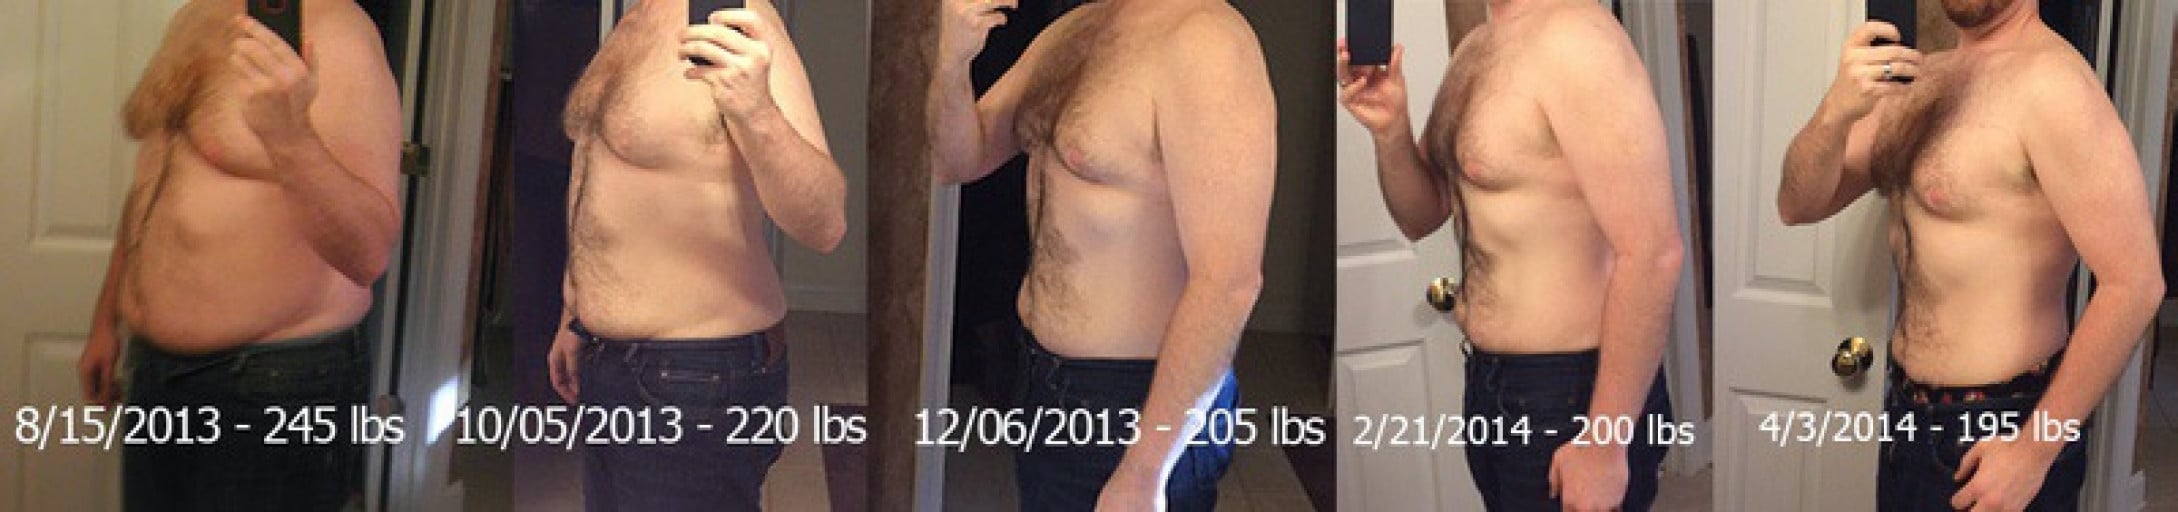 A photo of a 6'0" man showing a weight cut from 245 pounds to 195 pounds. A net loss of 50 pounds.